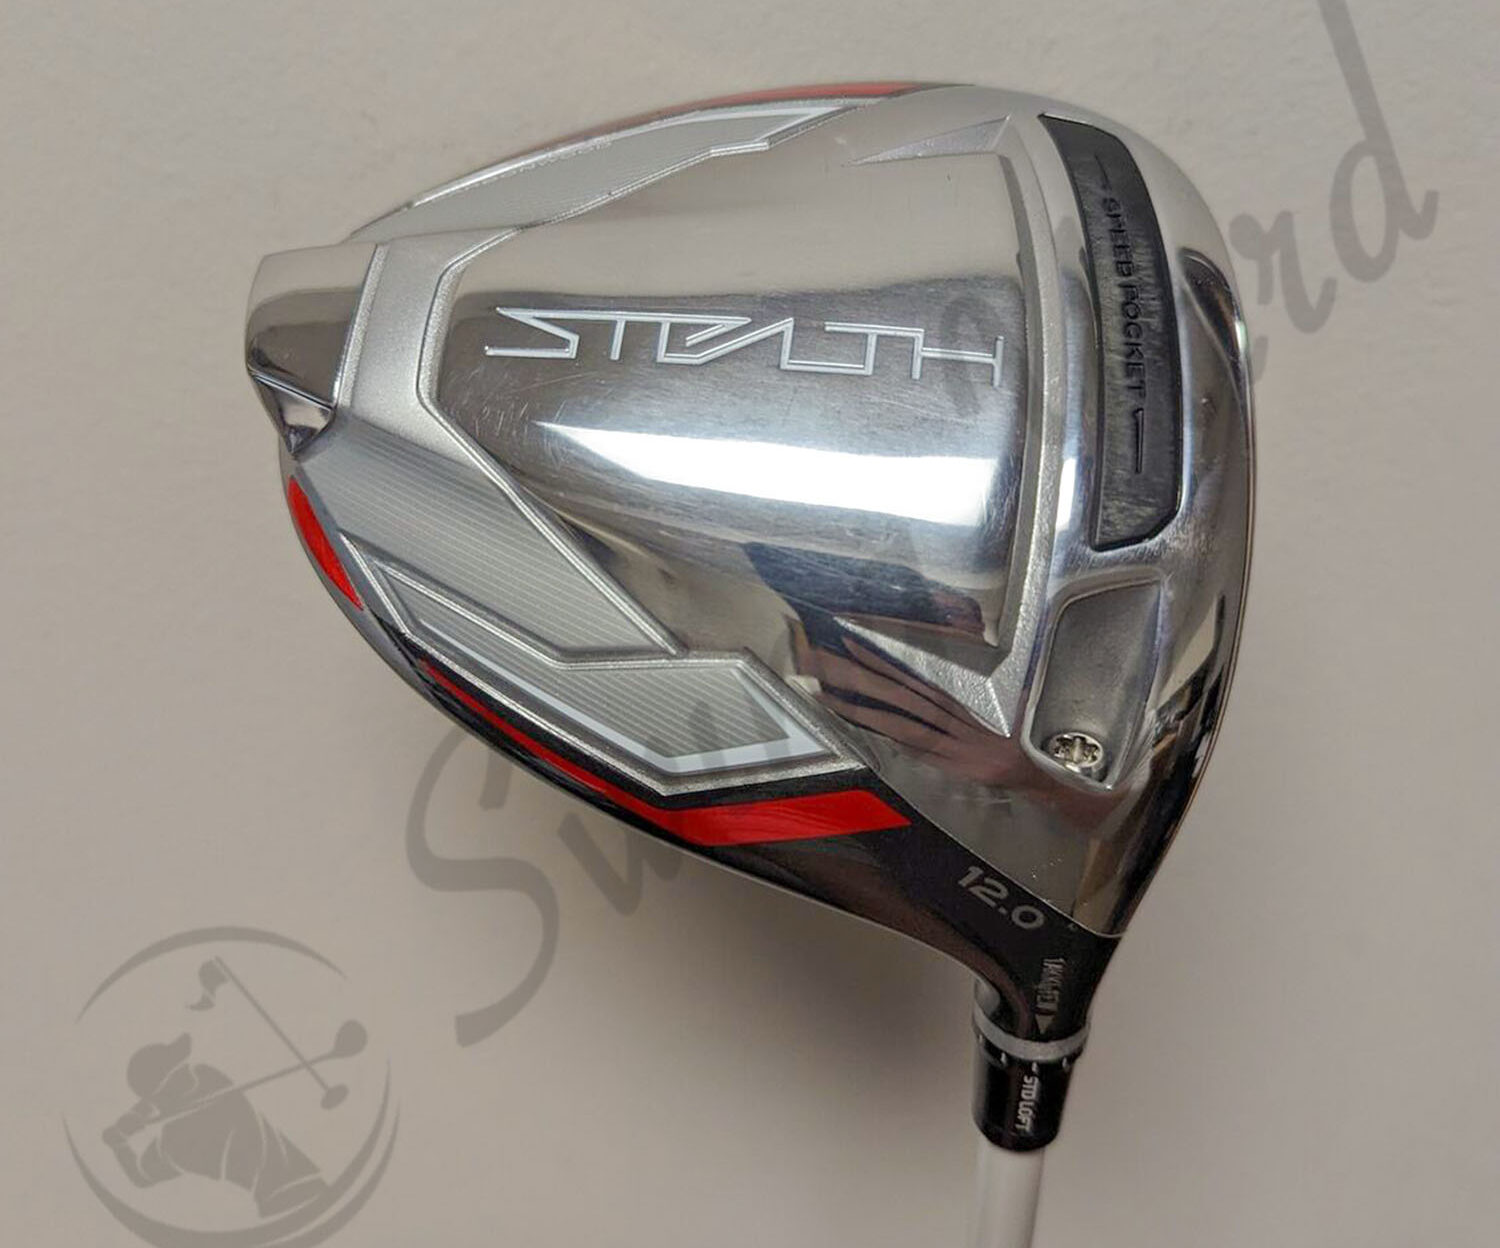 The TaylorMade Stealth Women’s driver for testing